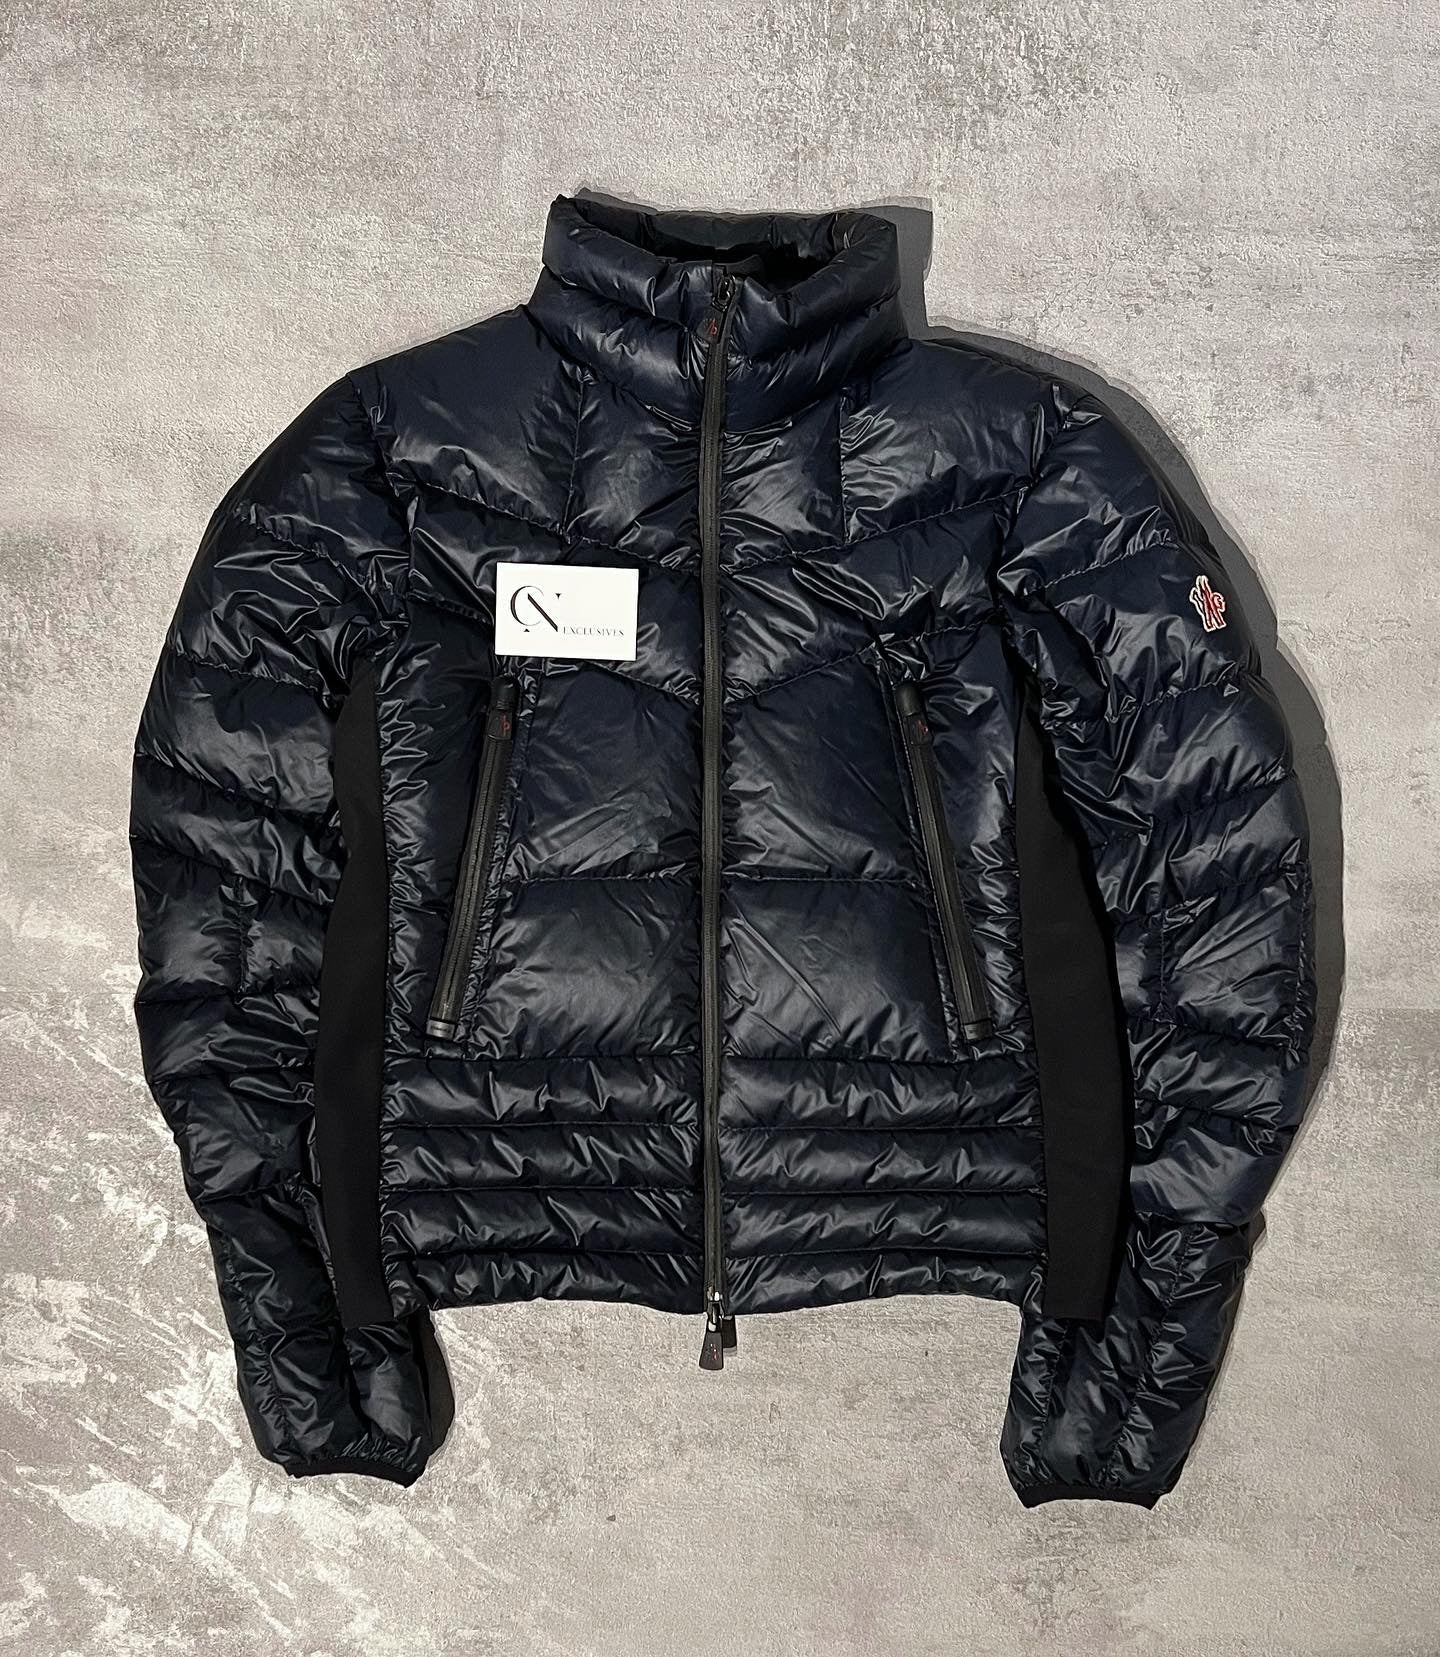 Moncler Grenoble Canmore Jacket - Size 2